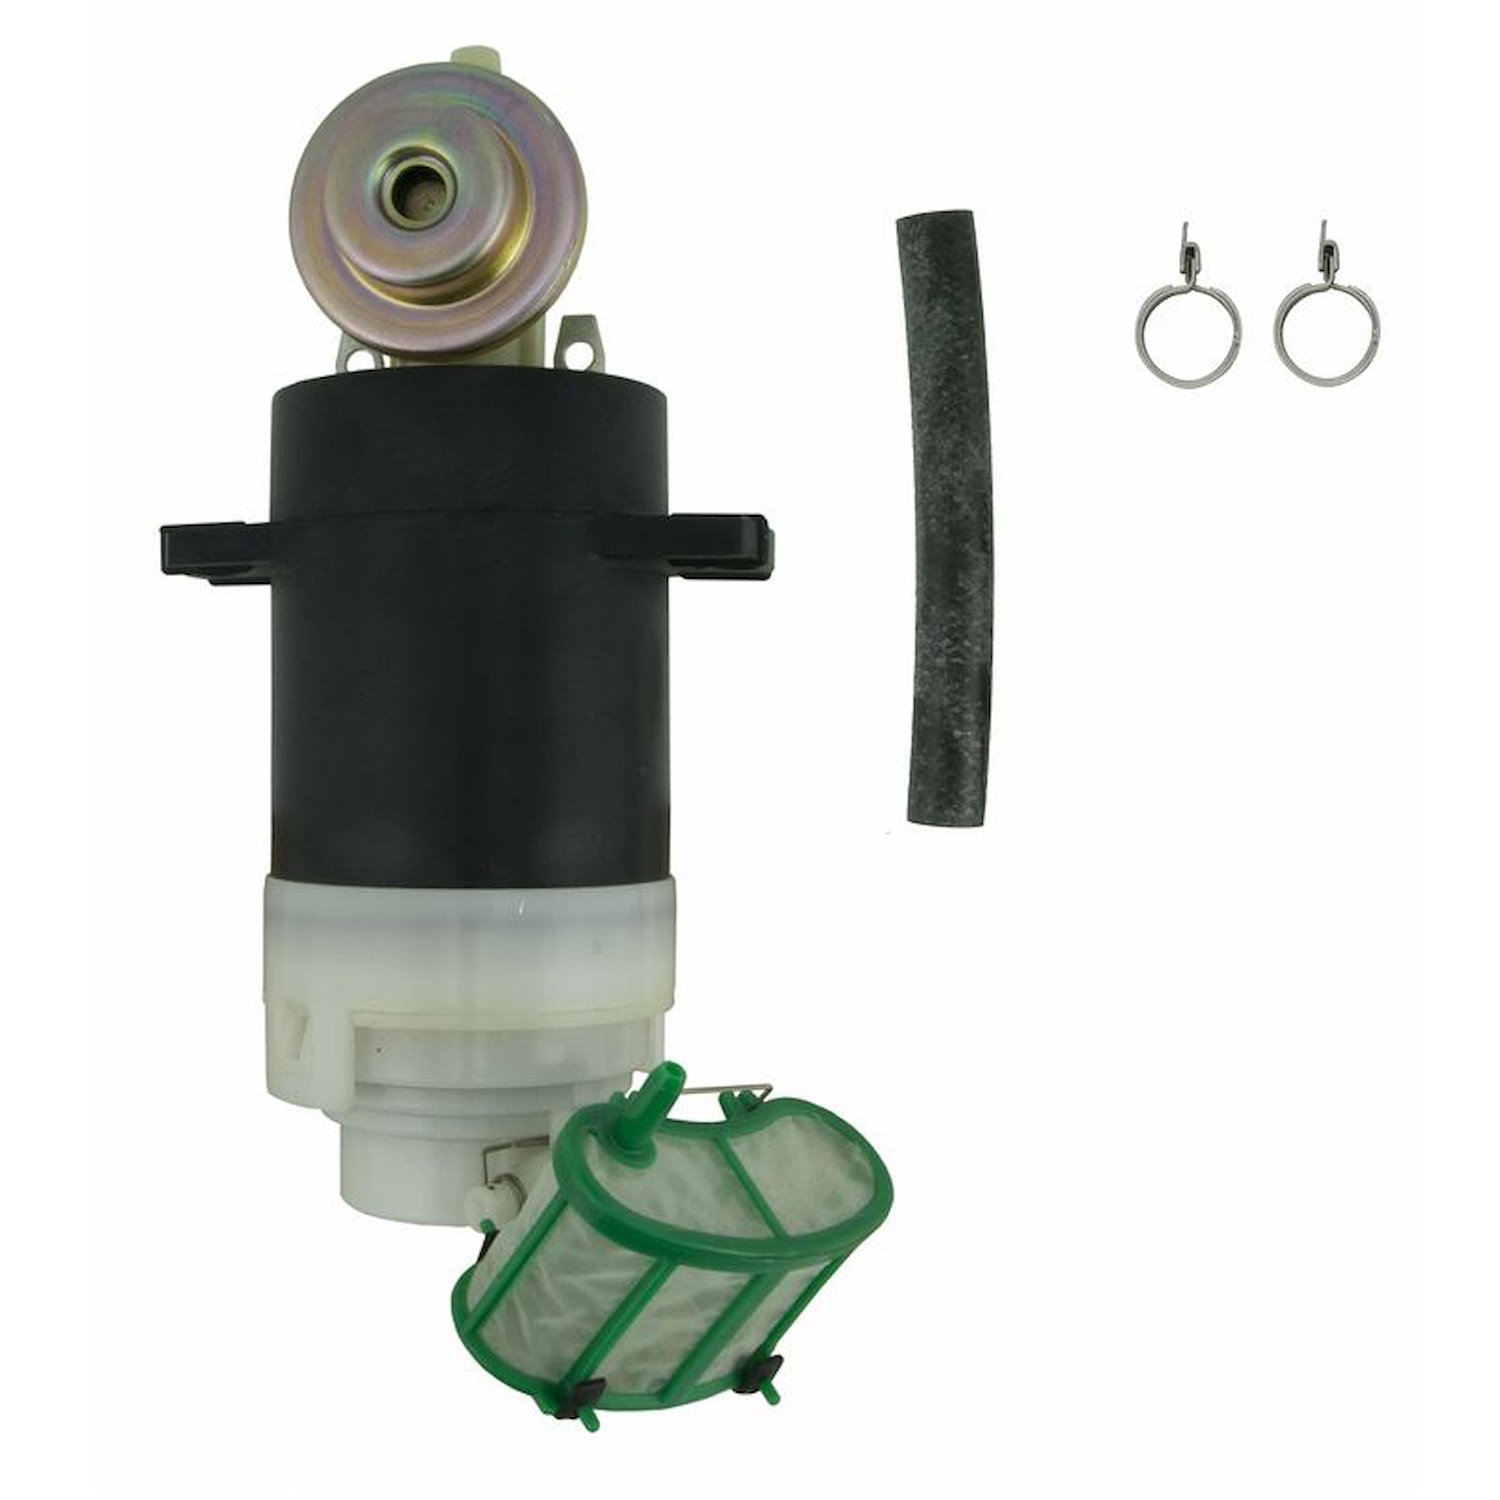 EFI In-Tank Electric Fuel Pump And Strainer Set for 1986-1992 for Nissan D21/1995 Nissan Pickup